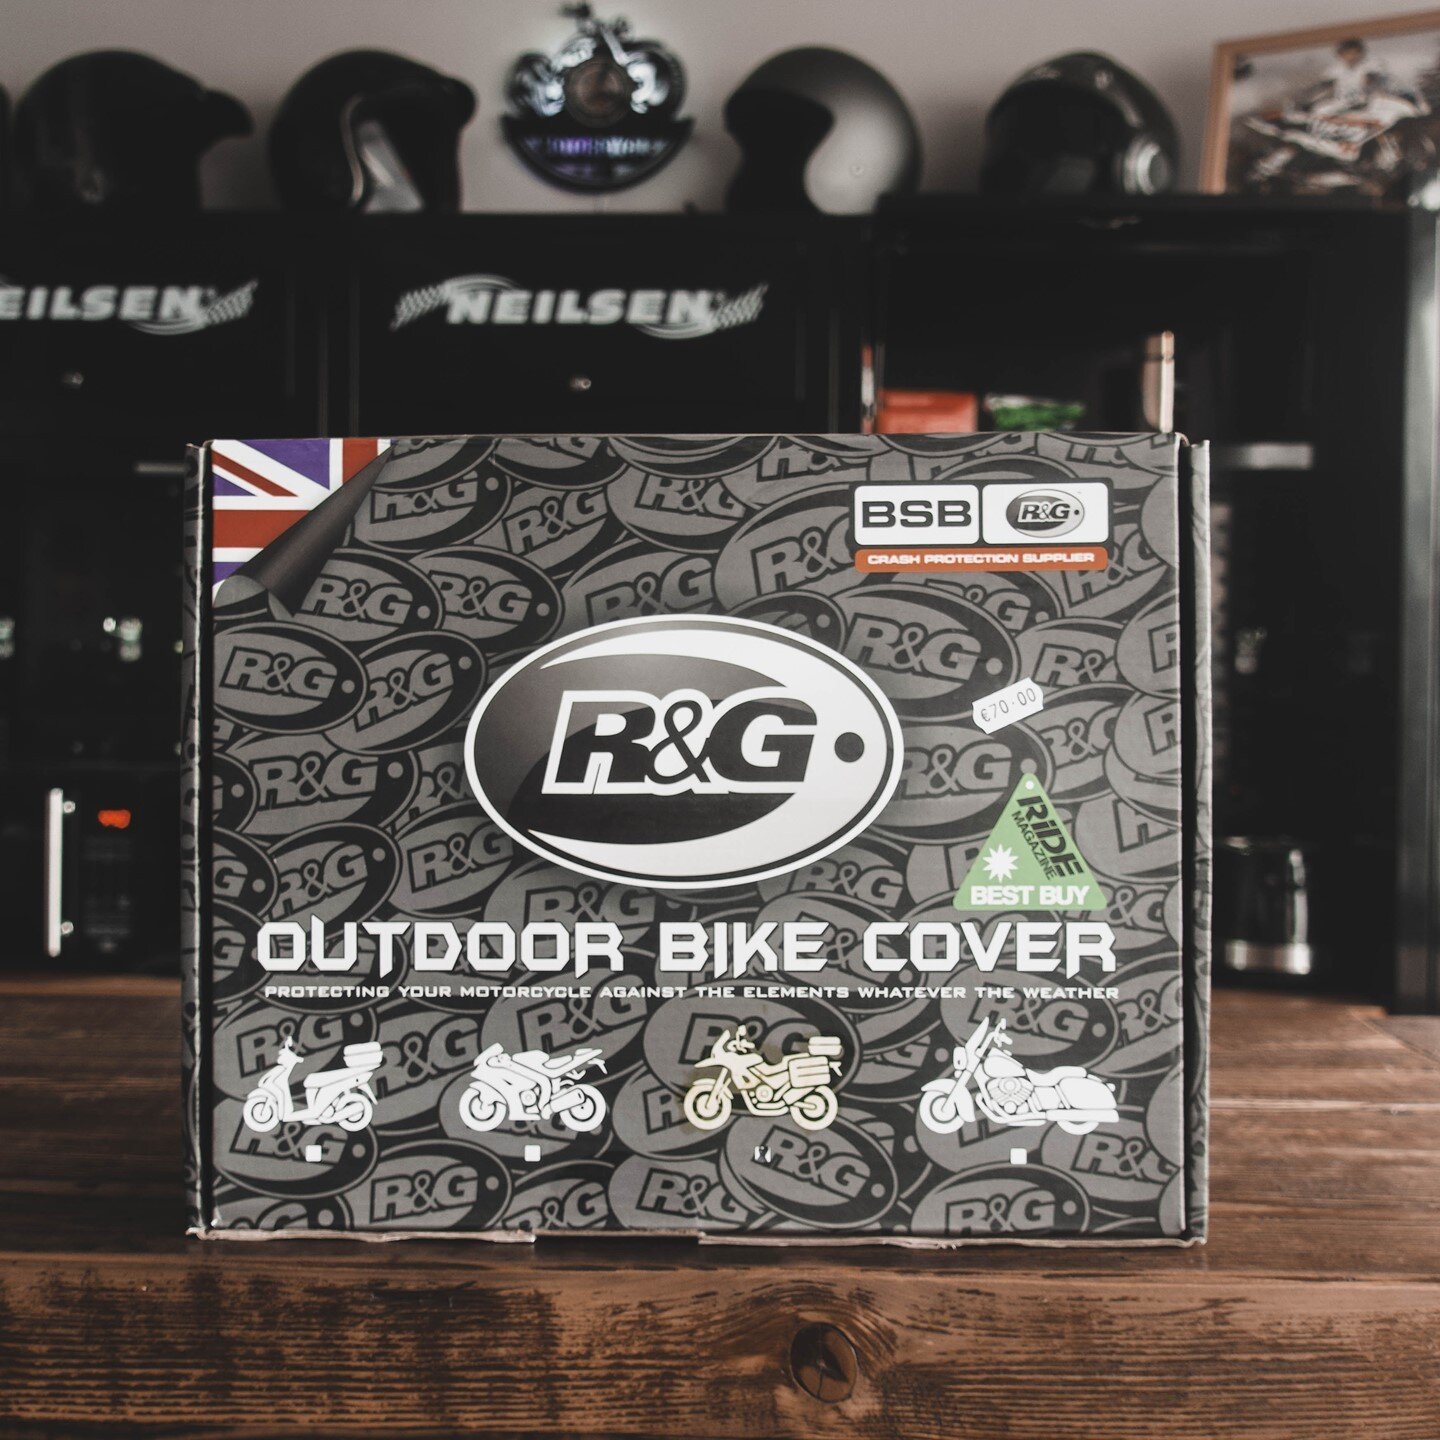 Adventure Bike Outdoor Cover ⁠
&euro;70 ⁠
from @RG_Crashprotection⁠
⁠
The R&amp;G Adventure Outdoor Cover fits on adventure and touring sized bikes and has been redesigned to include many new features. Based off their original award winning Superbike